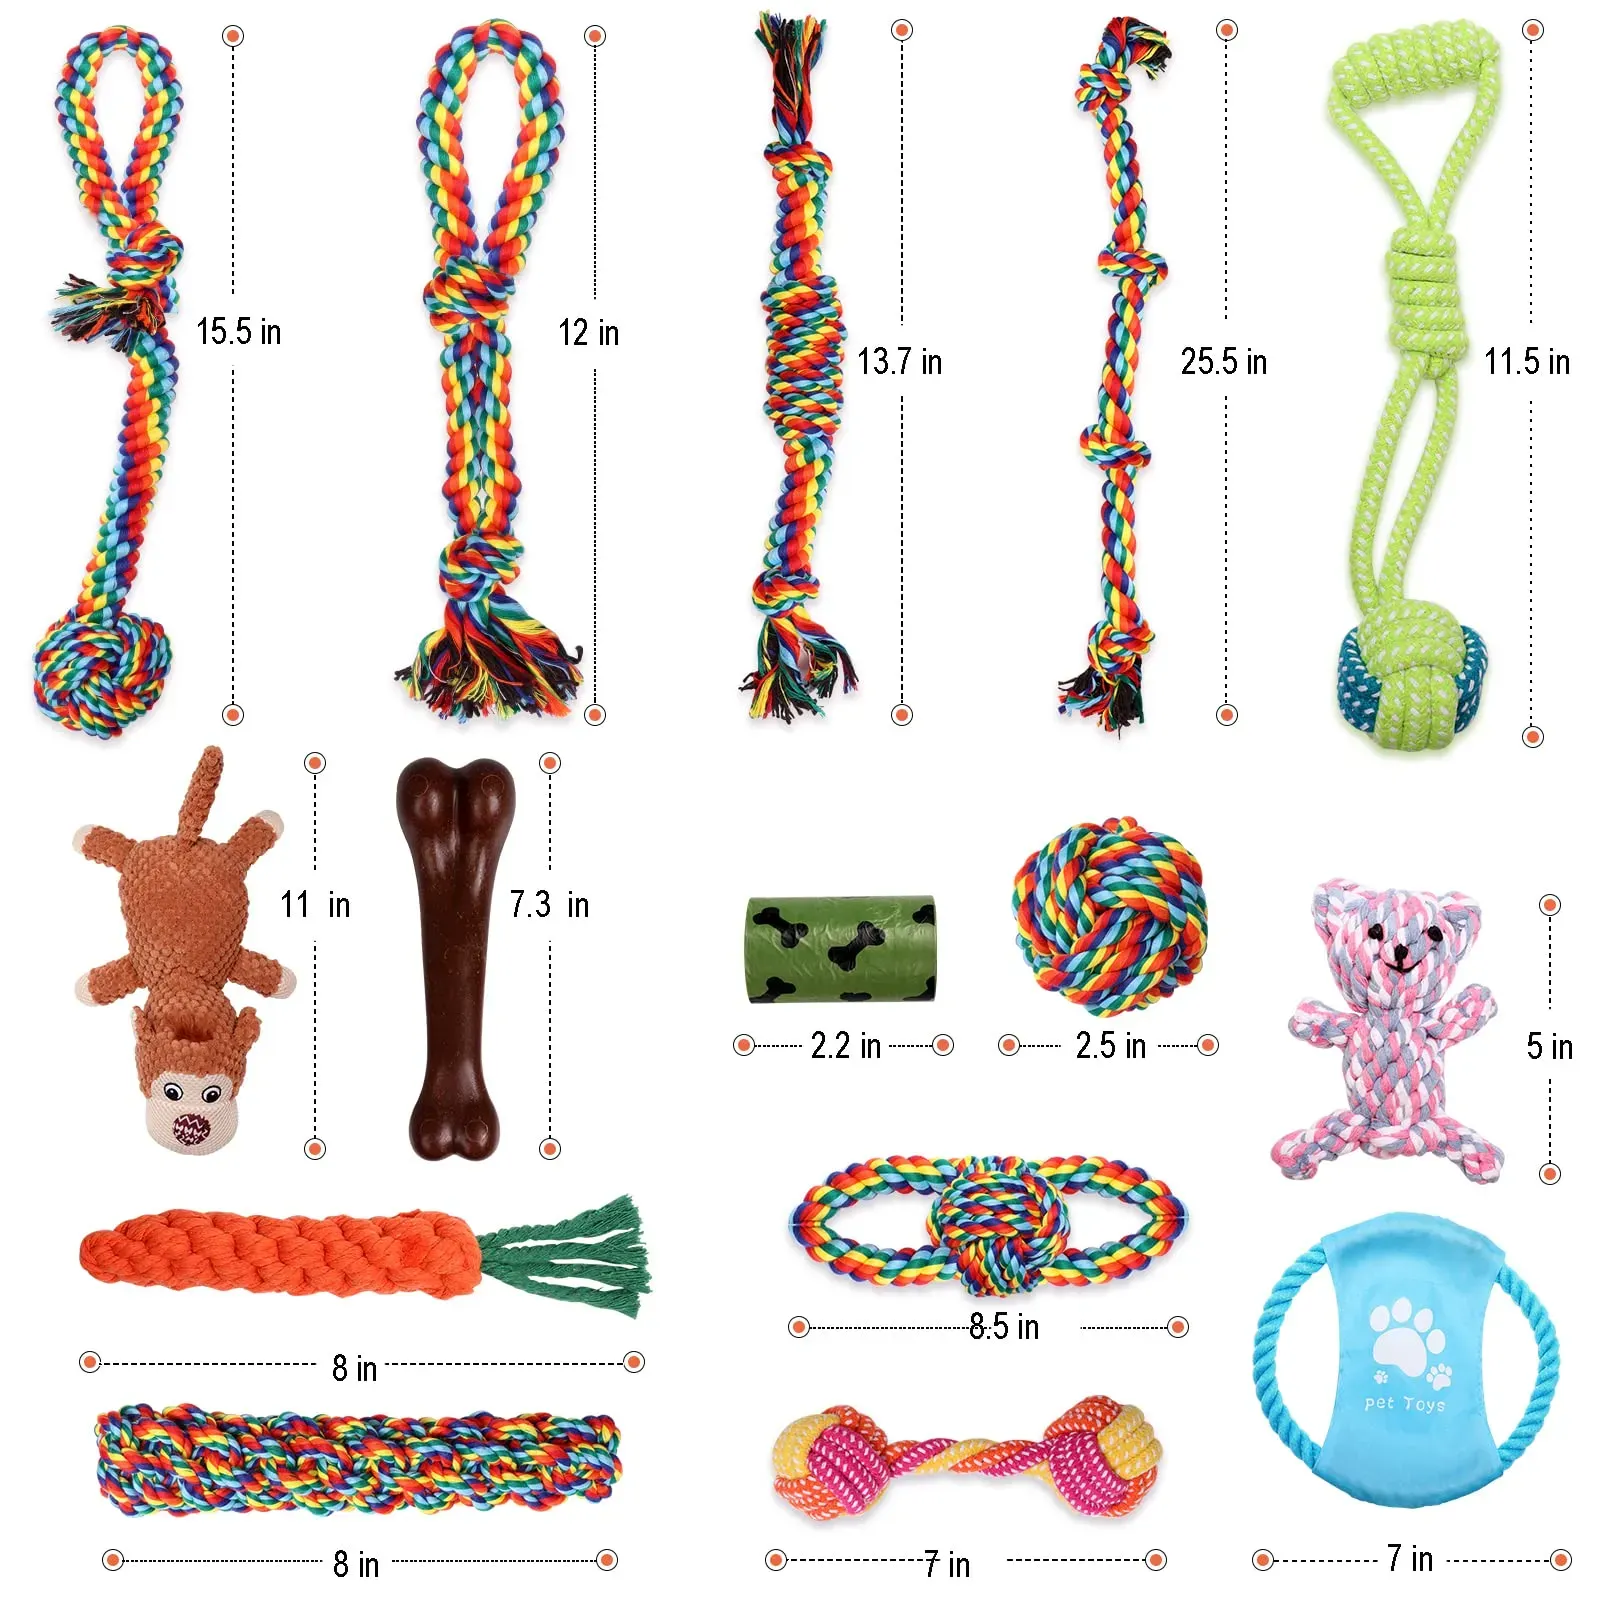 dog chew toys for aggressive chewers puppy teething chew toys dog rope toys tug of war dog toys for puppy teething